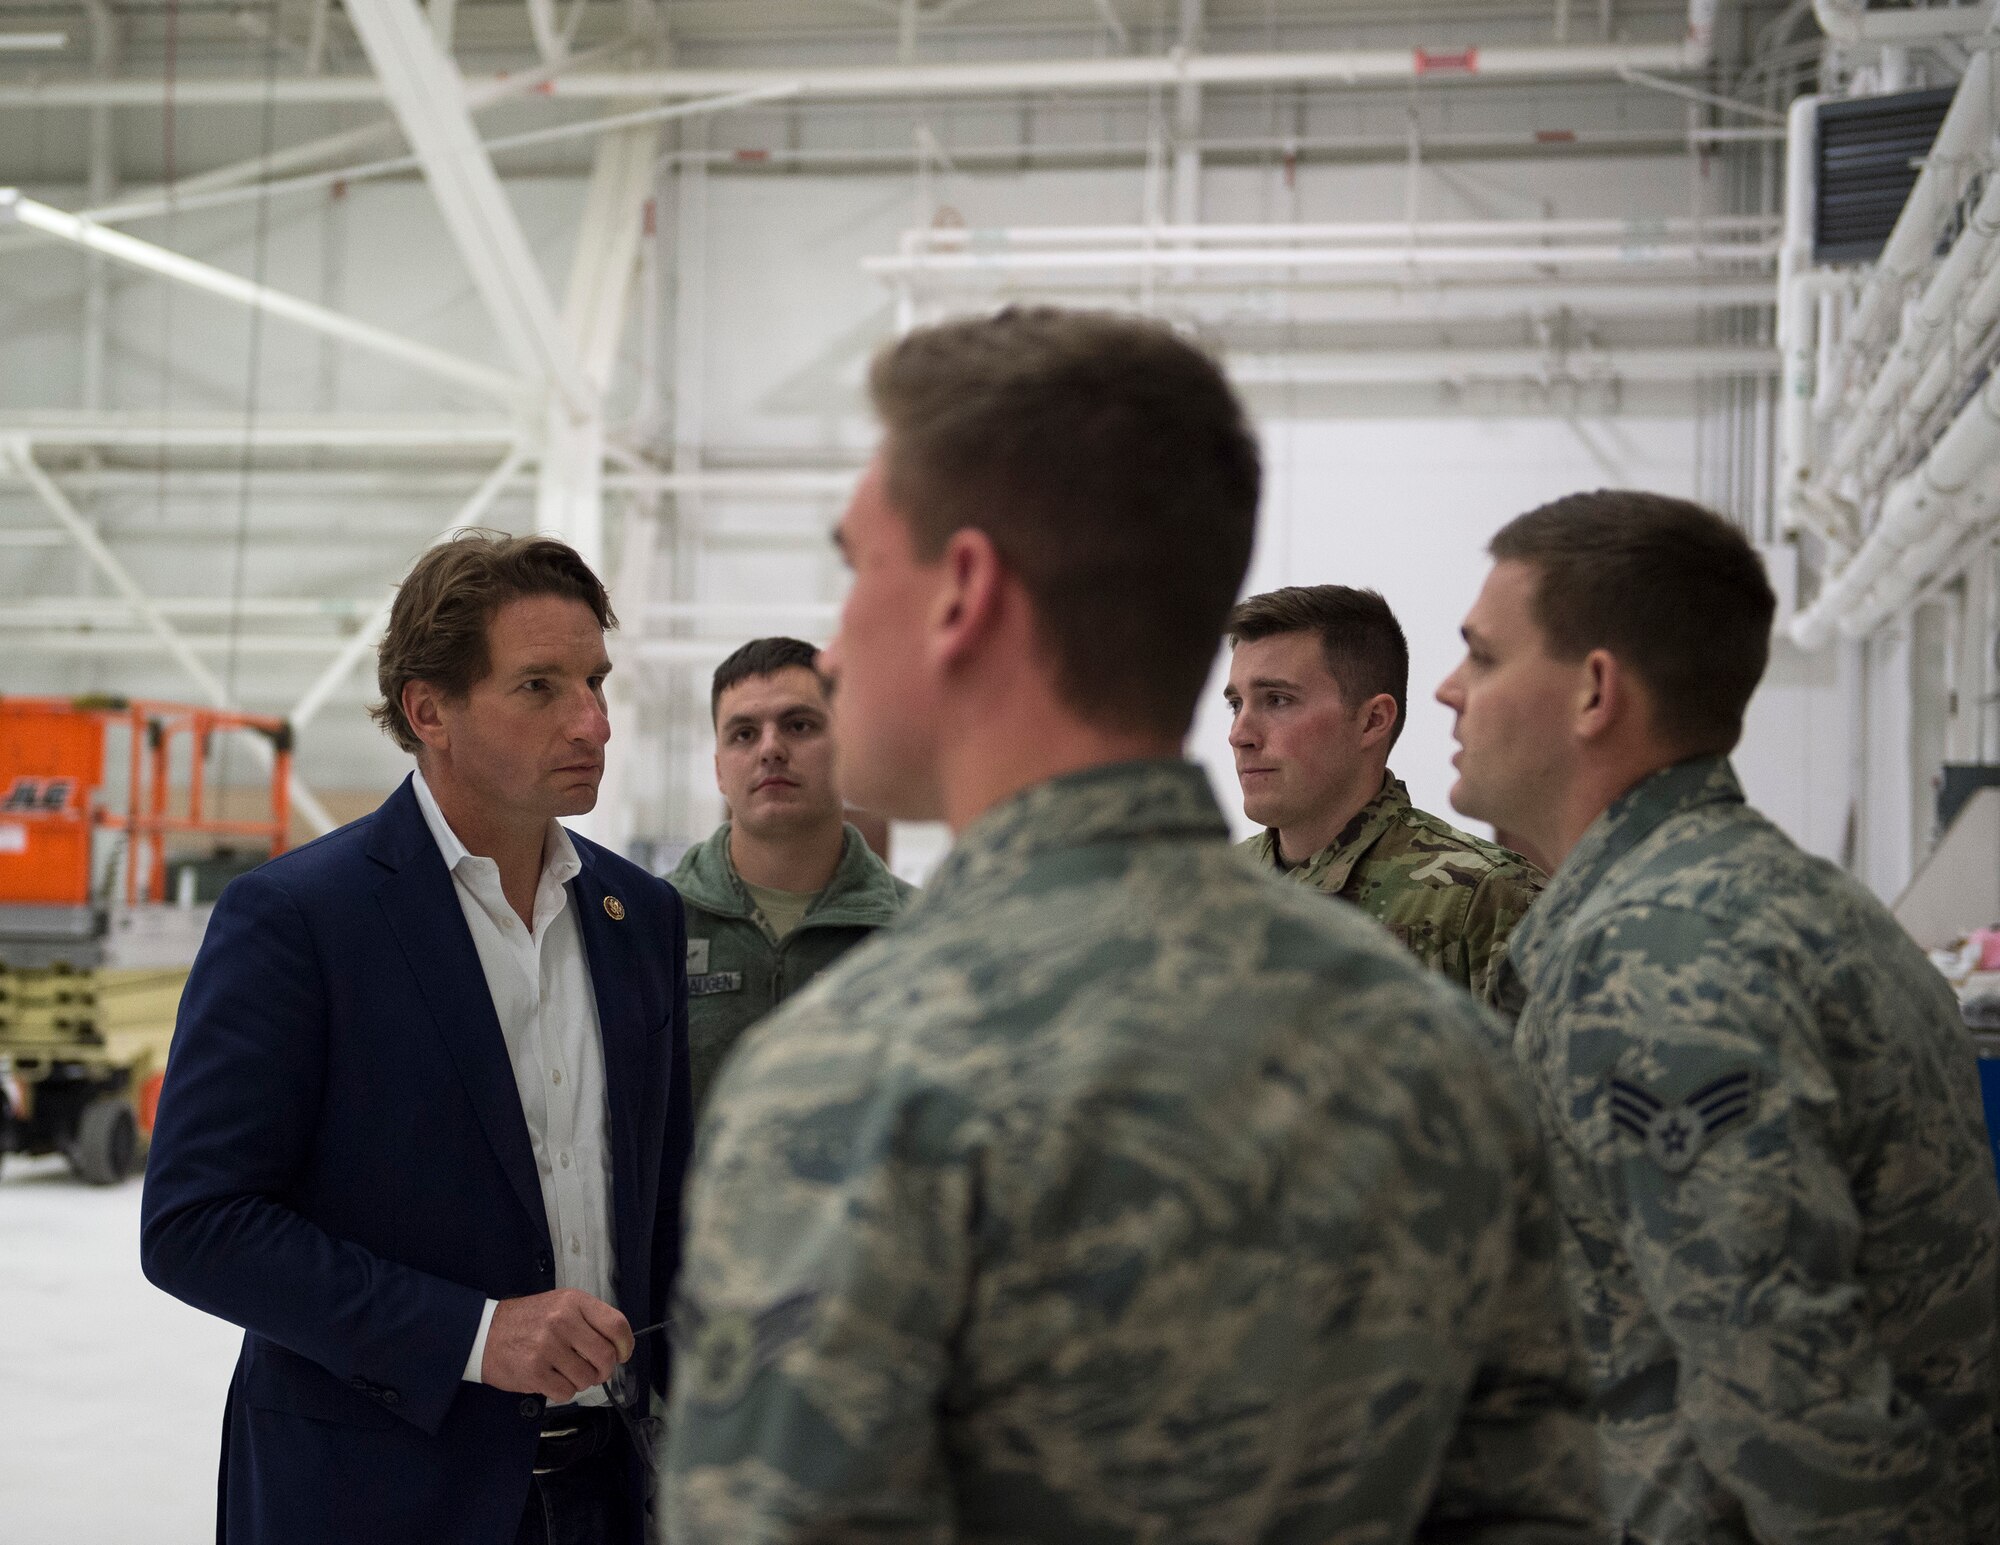 U.S. Rep. Dean Phillips of Minnesota’s third district, visits with Airmen from the 133rd Maintenance Group in St. Paul, Minn. Nov. 6, 2019.